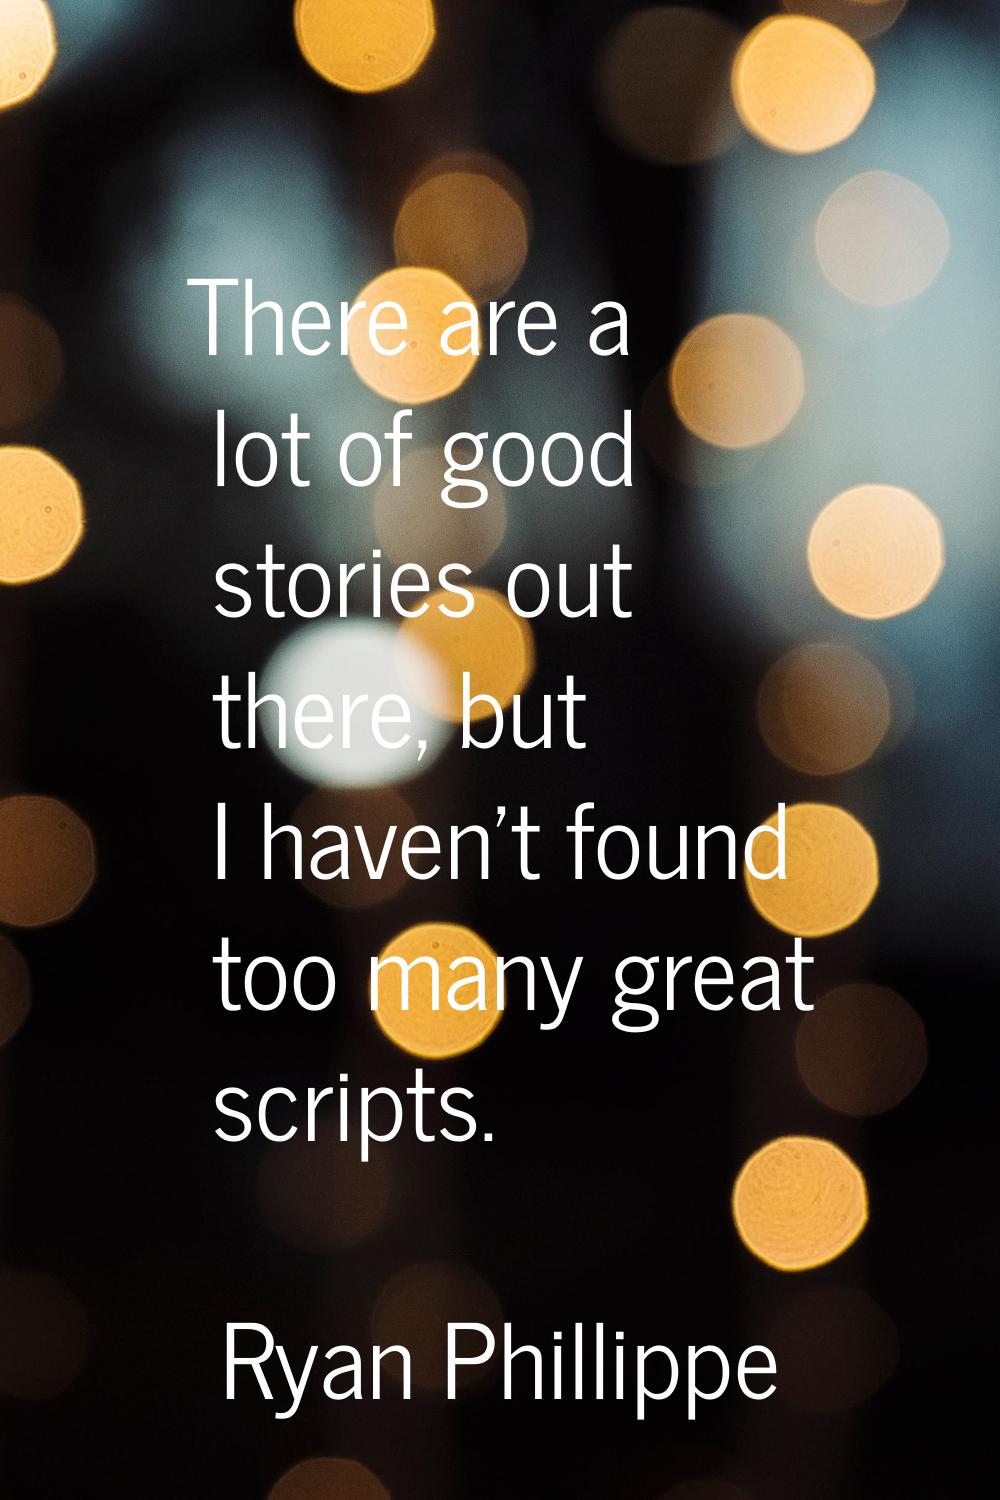 There are a lot of good stories out there, but I haven't found too many great scripts.